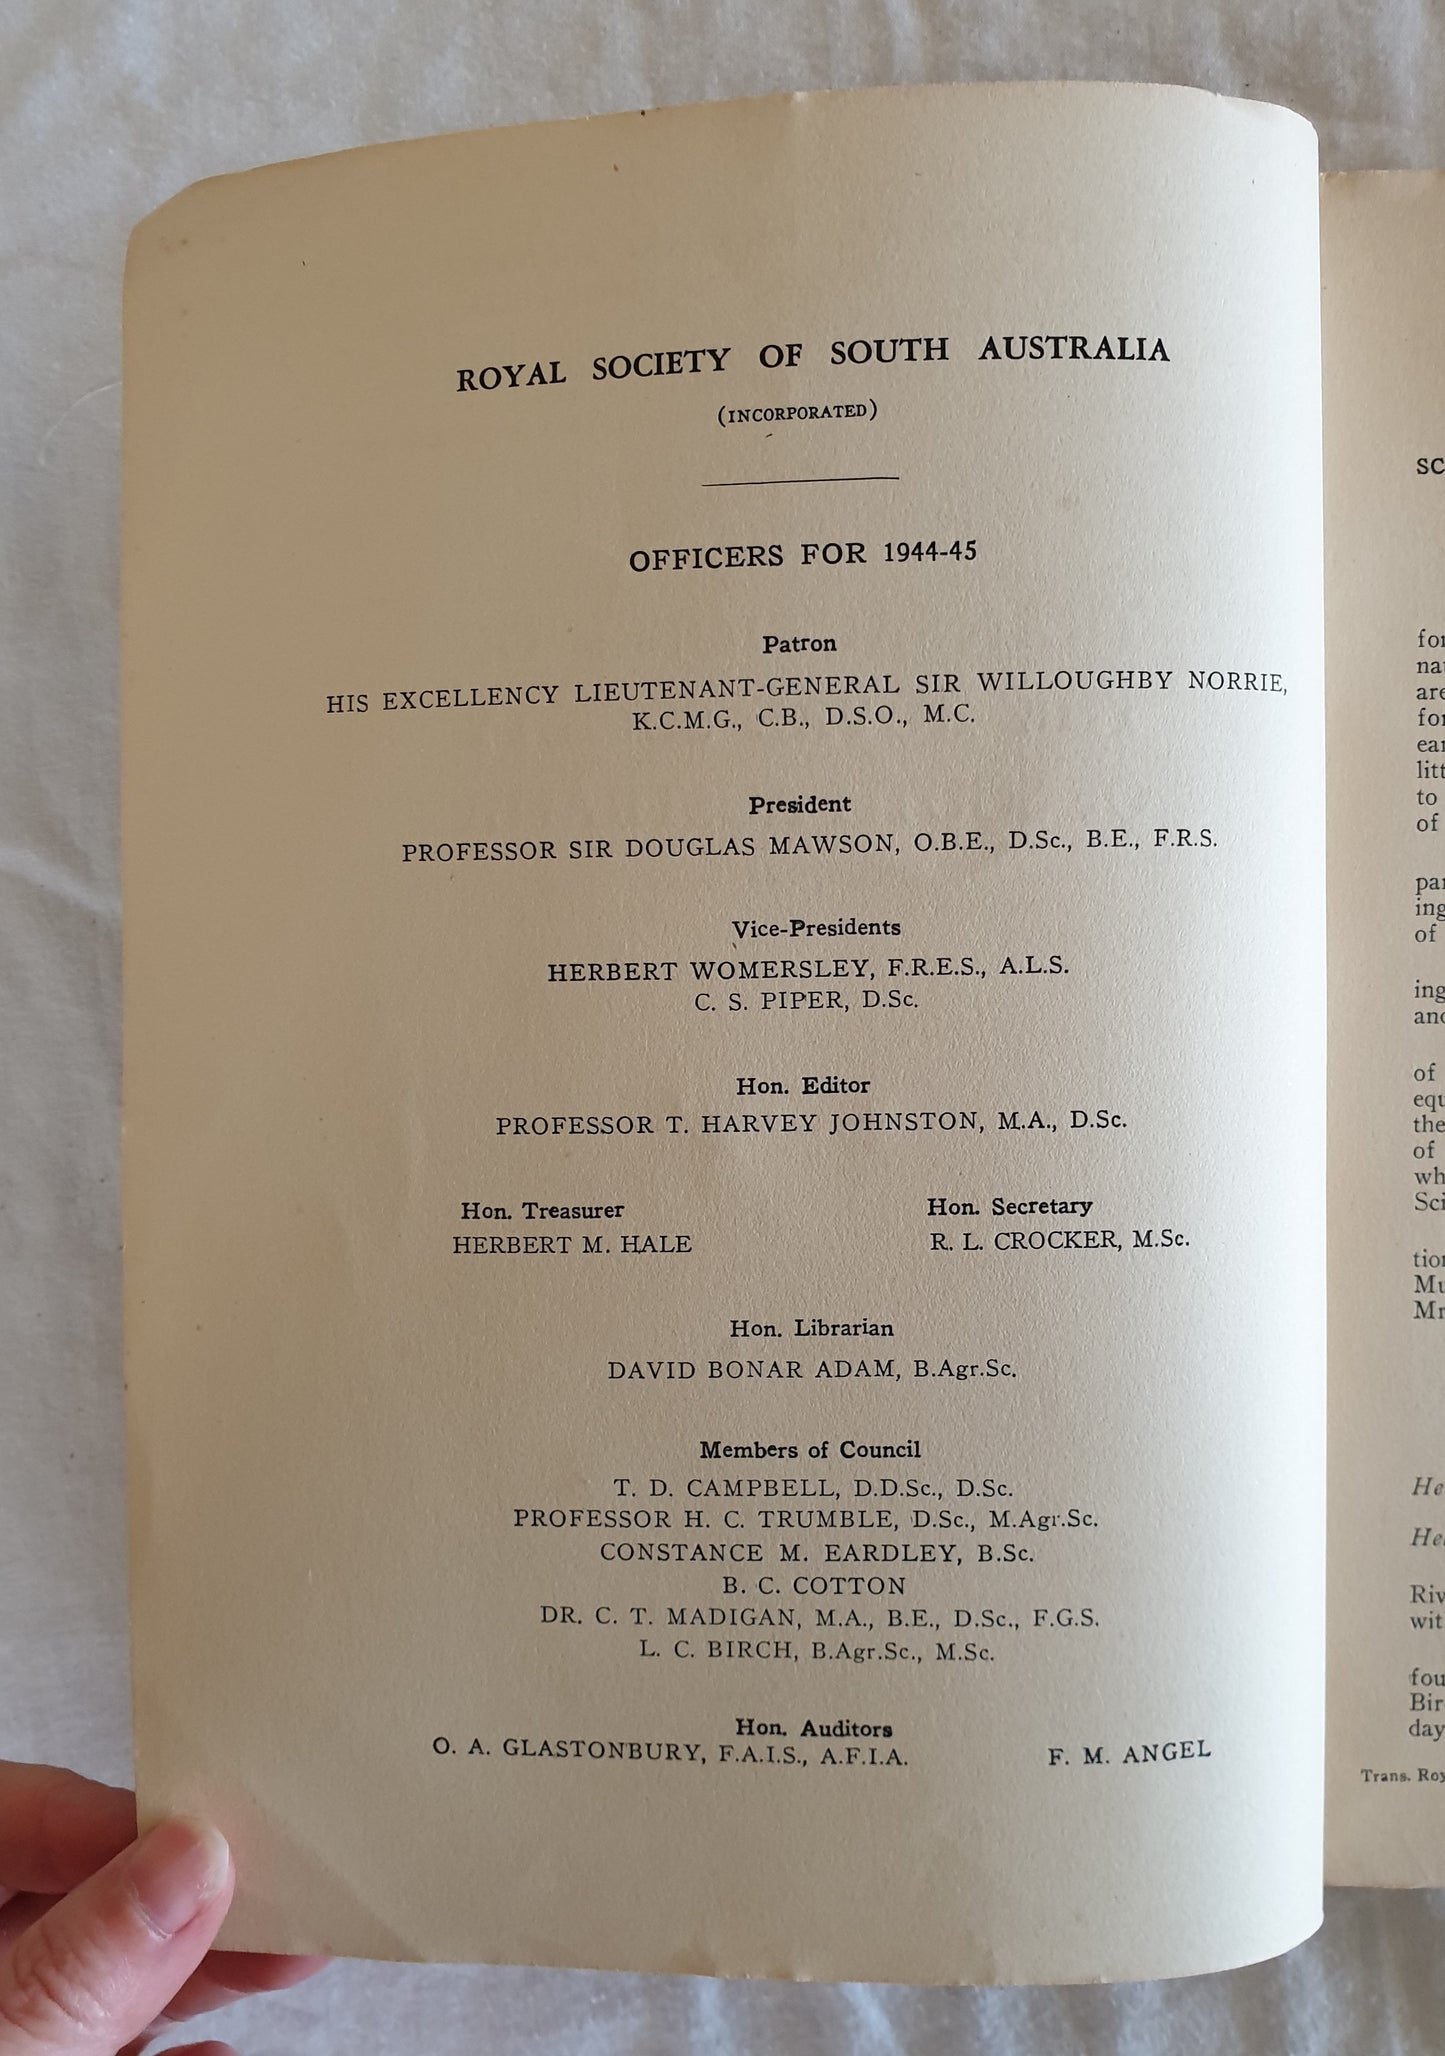 Transactions of The Royal Society of South Australia